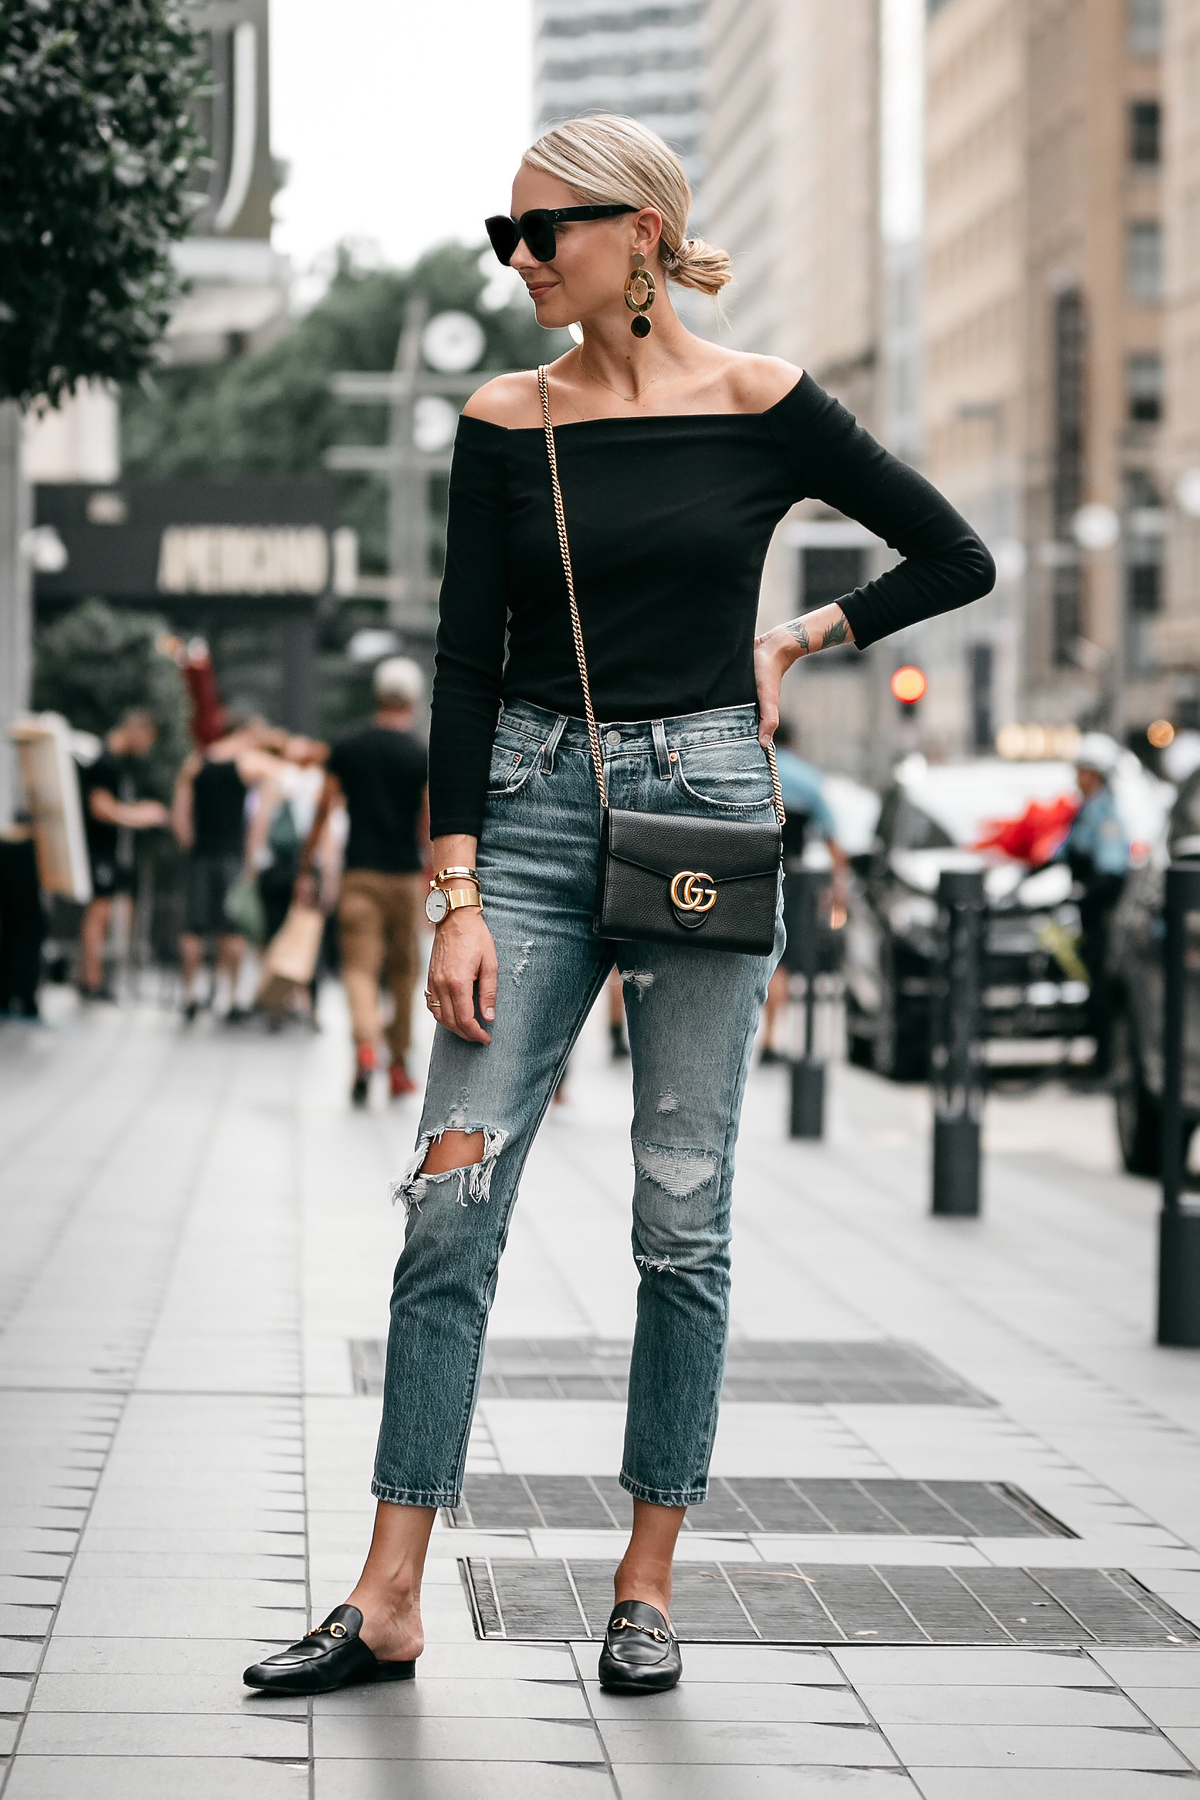 Blonde Woman Wearing Jcrew black off the shoulder top Levis Denim Ripped Jeans Gucci Marmont Handbag Gucci Princetown Loafer Mules Fashion Jackson Dallas Blogger Fashion Blogger Street Style